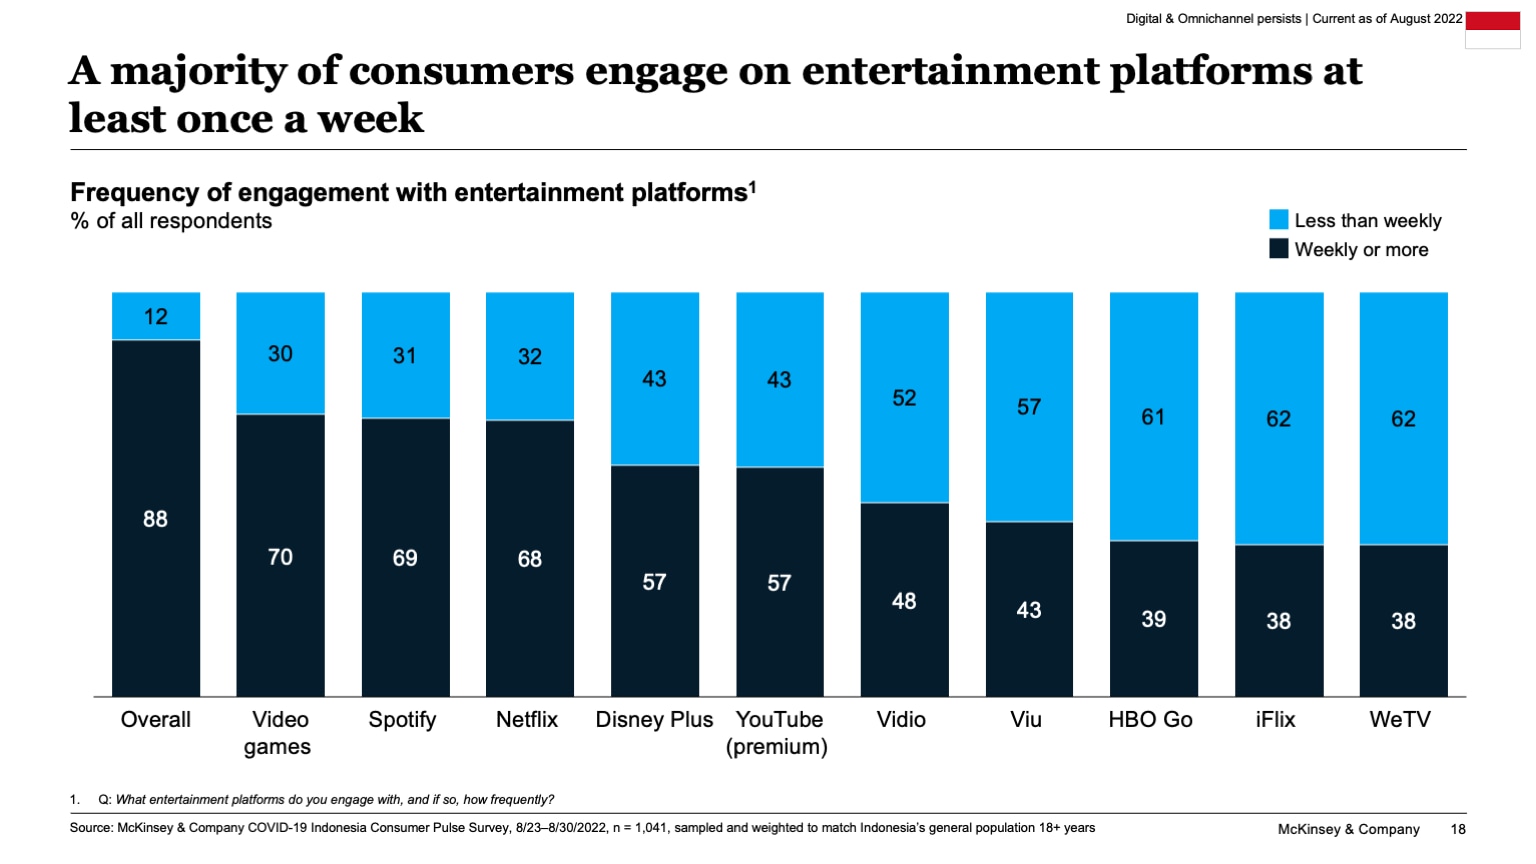 A majority of consumers engage on entertainment platforms at least once a week